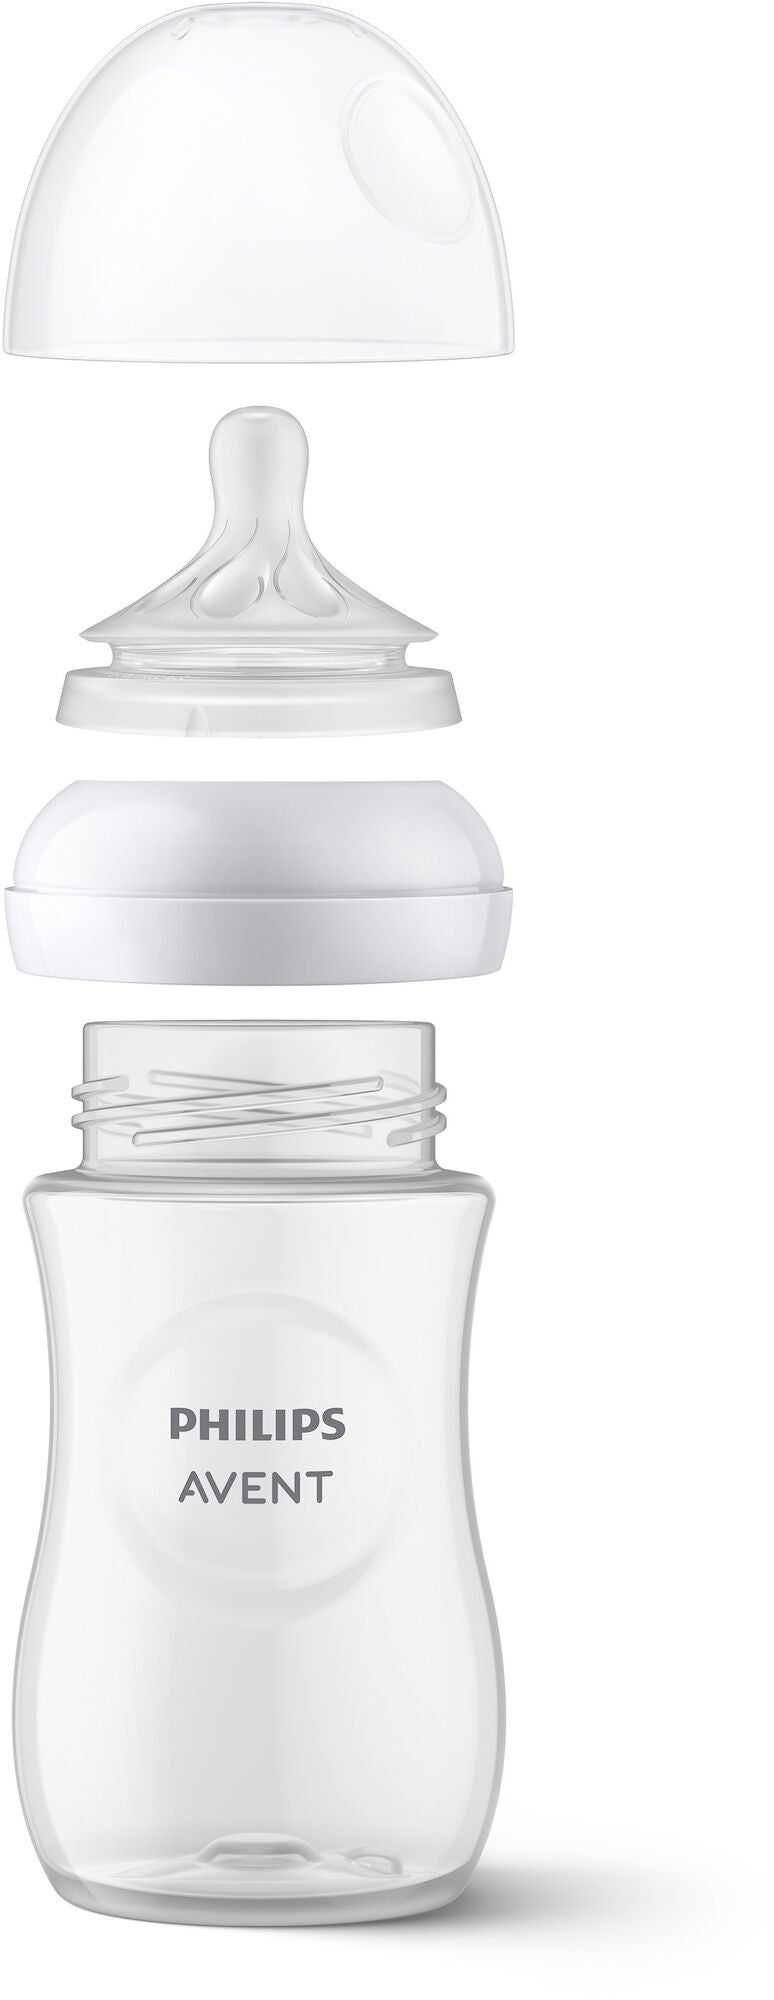 Philips Avent Natural Response Sauger Flow 2 von Philips Avent